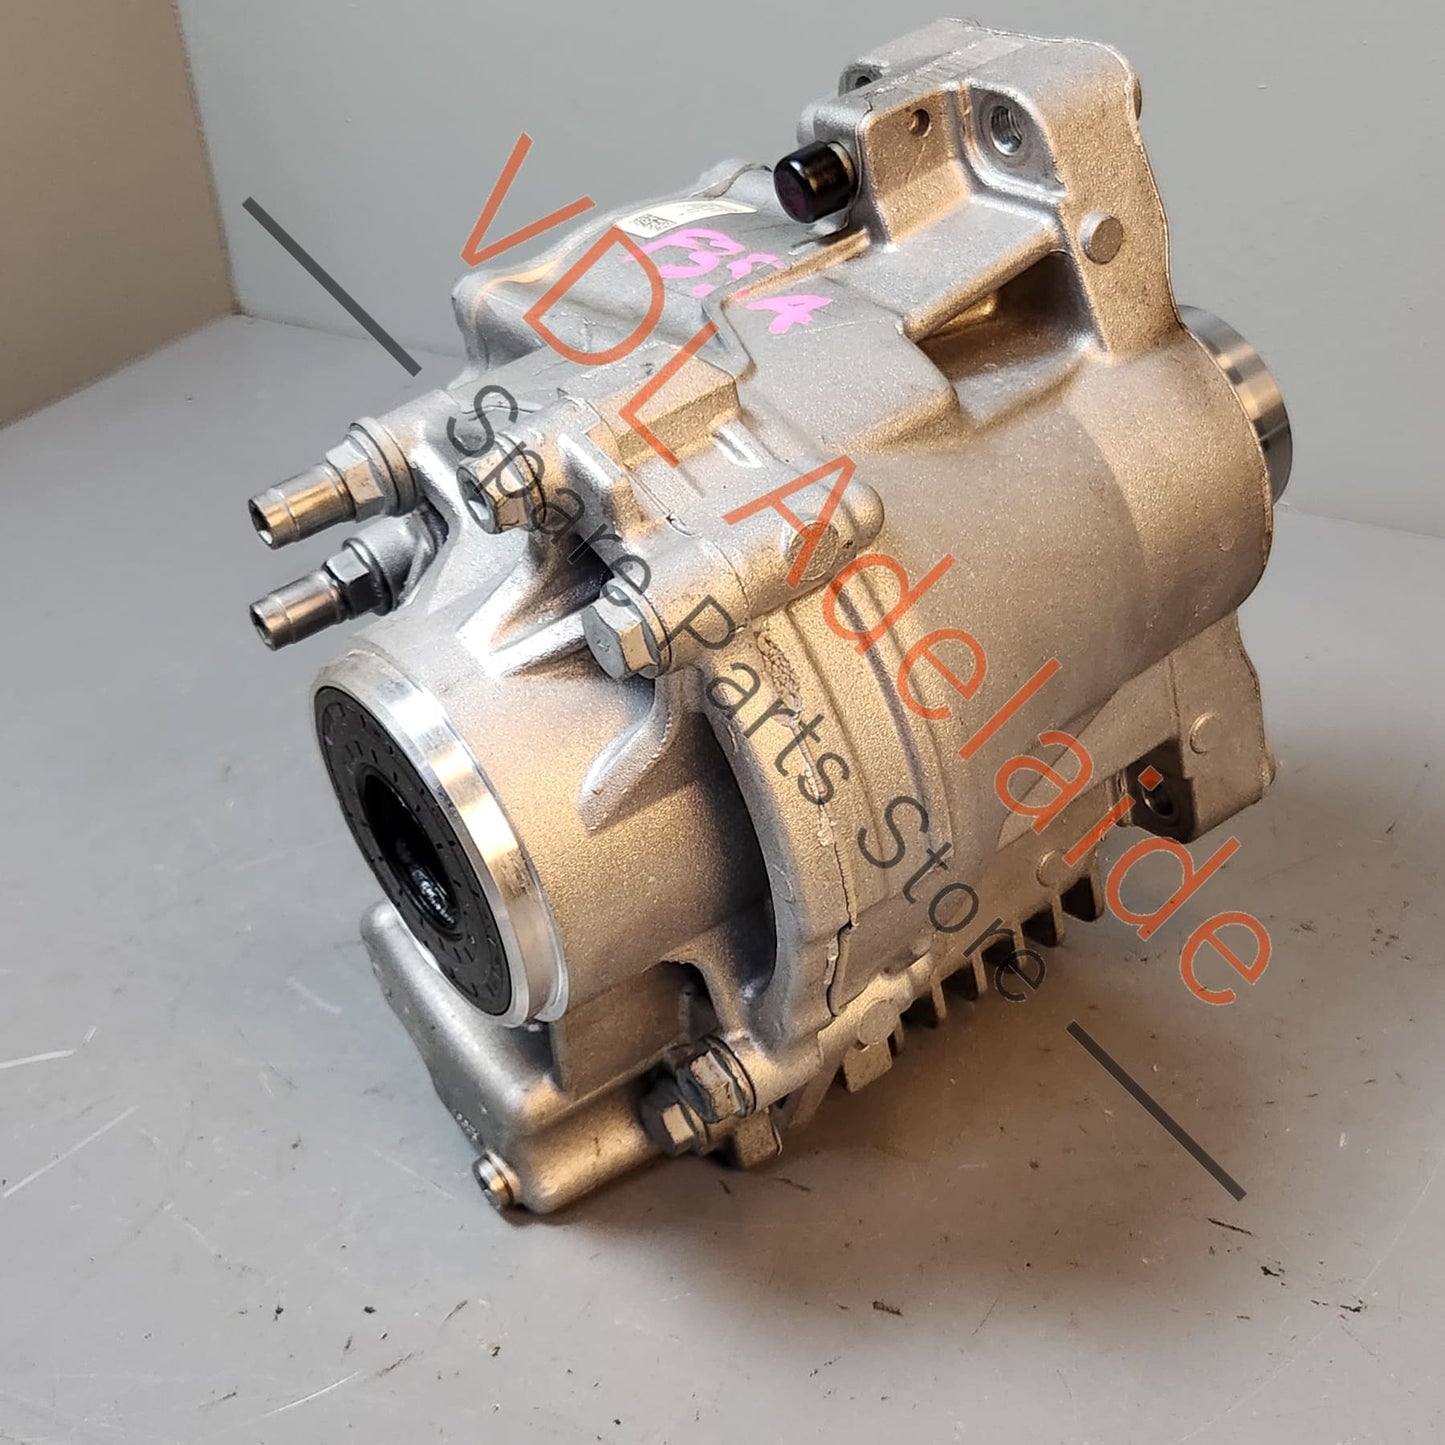 0CP409053R 0CP409053Q   Audi RS3 RSQ3 TTRS Front Bevel Box Angle Drive Differential 0CP409053R 0CP409053Q